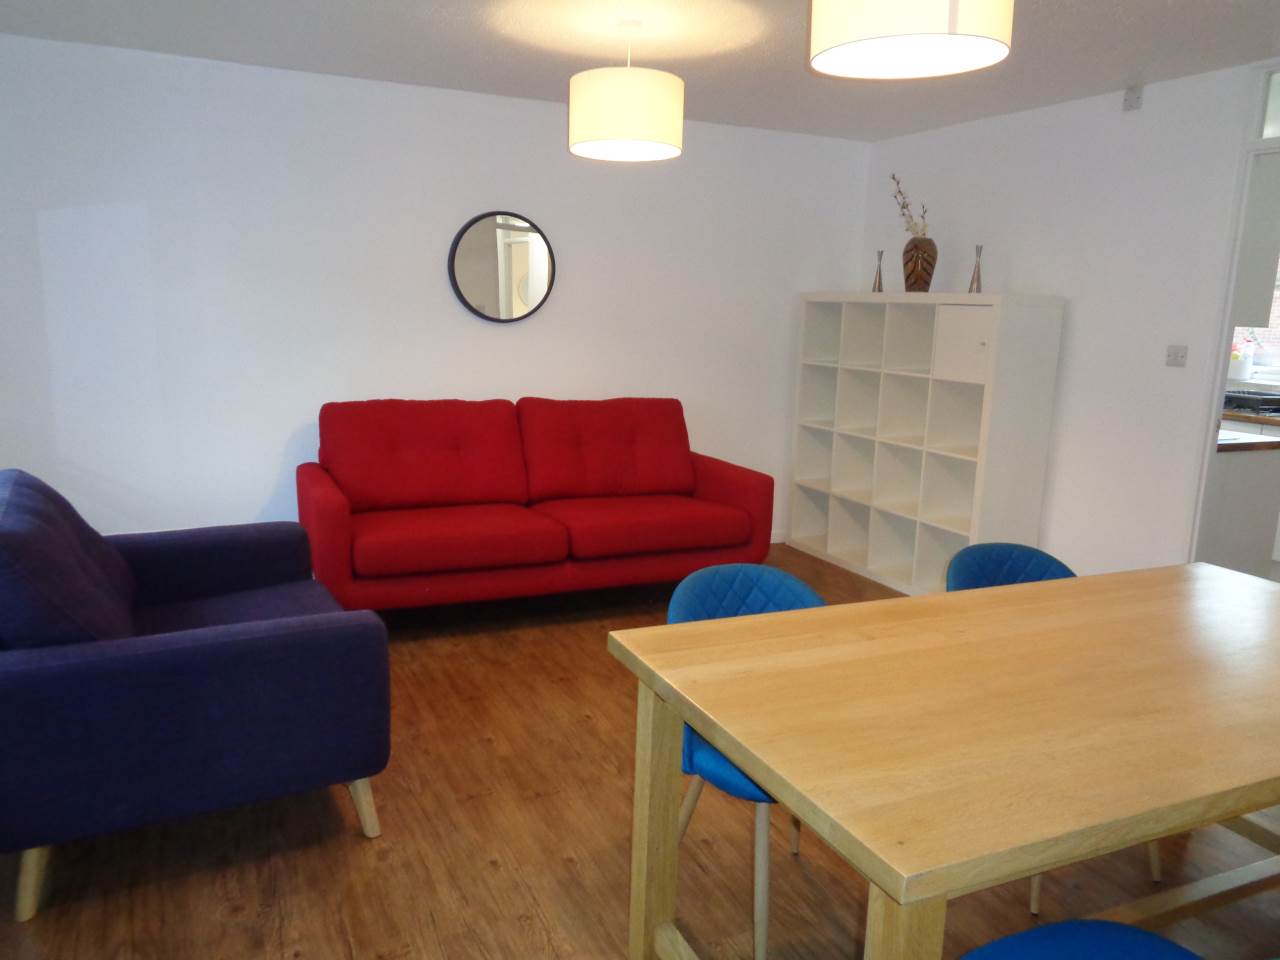 2 bed Flat for rent in Teversham. From Lets Rent Cambridge